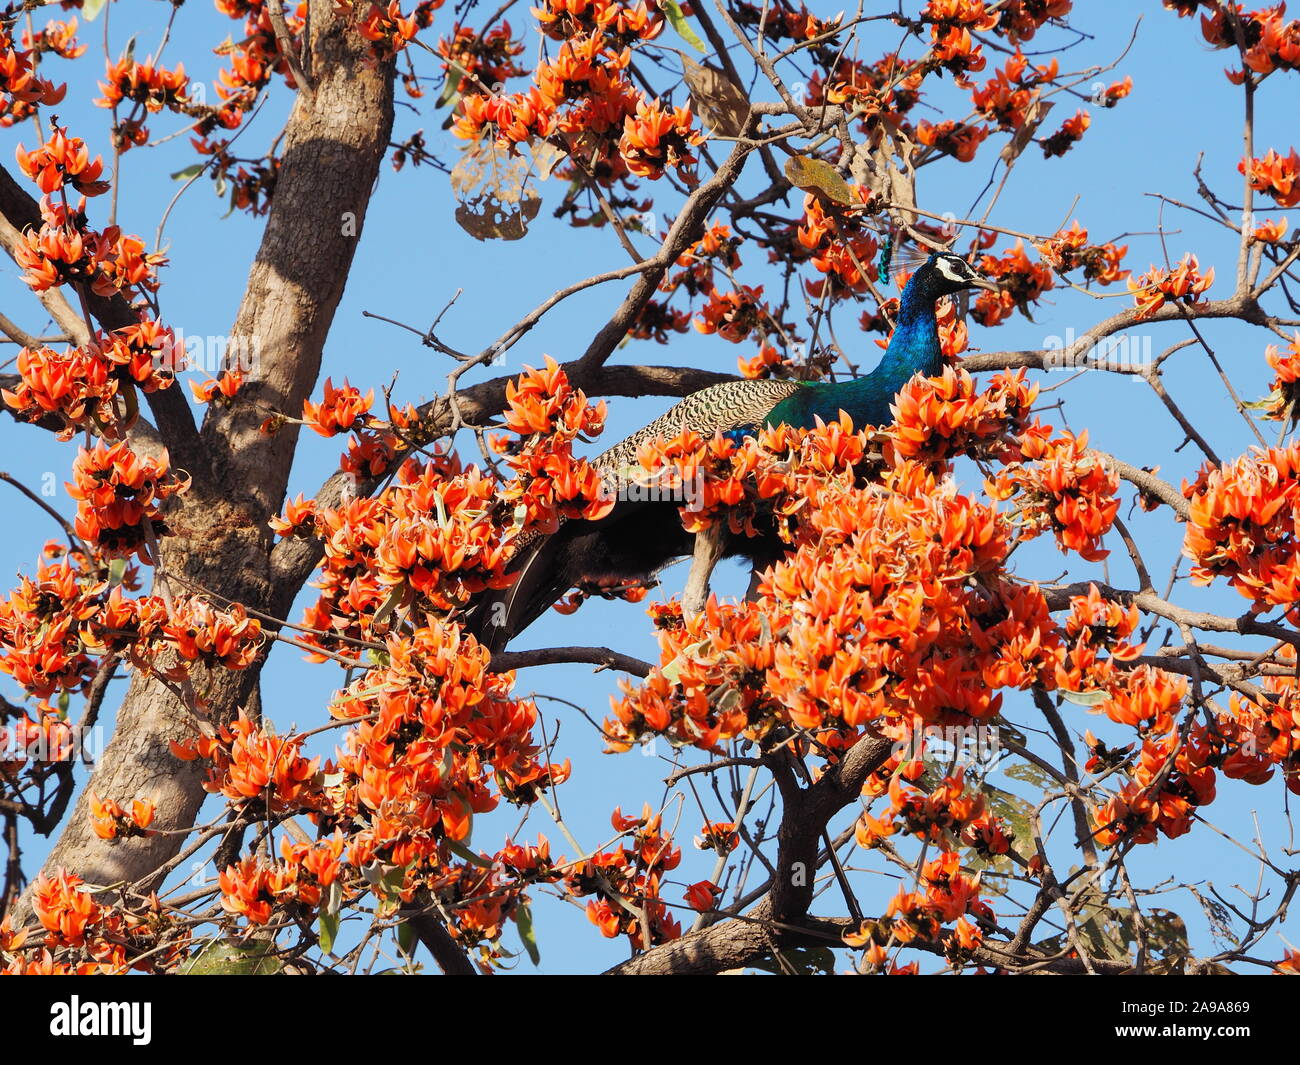 Peacock in the high branches of a flowering Indian Flame Tree tree (Delonix regia or Gulmohar). Very colourful. Ranthambore India Stock Photo